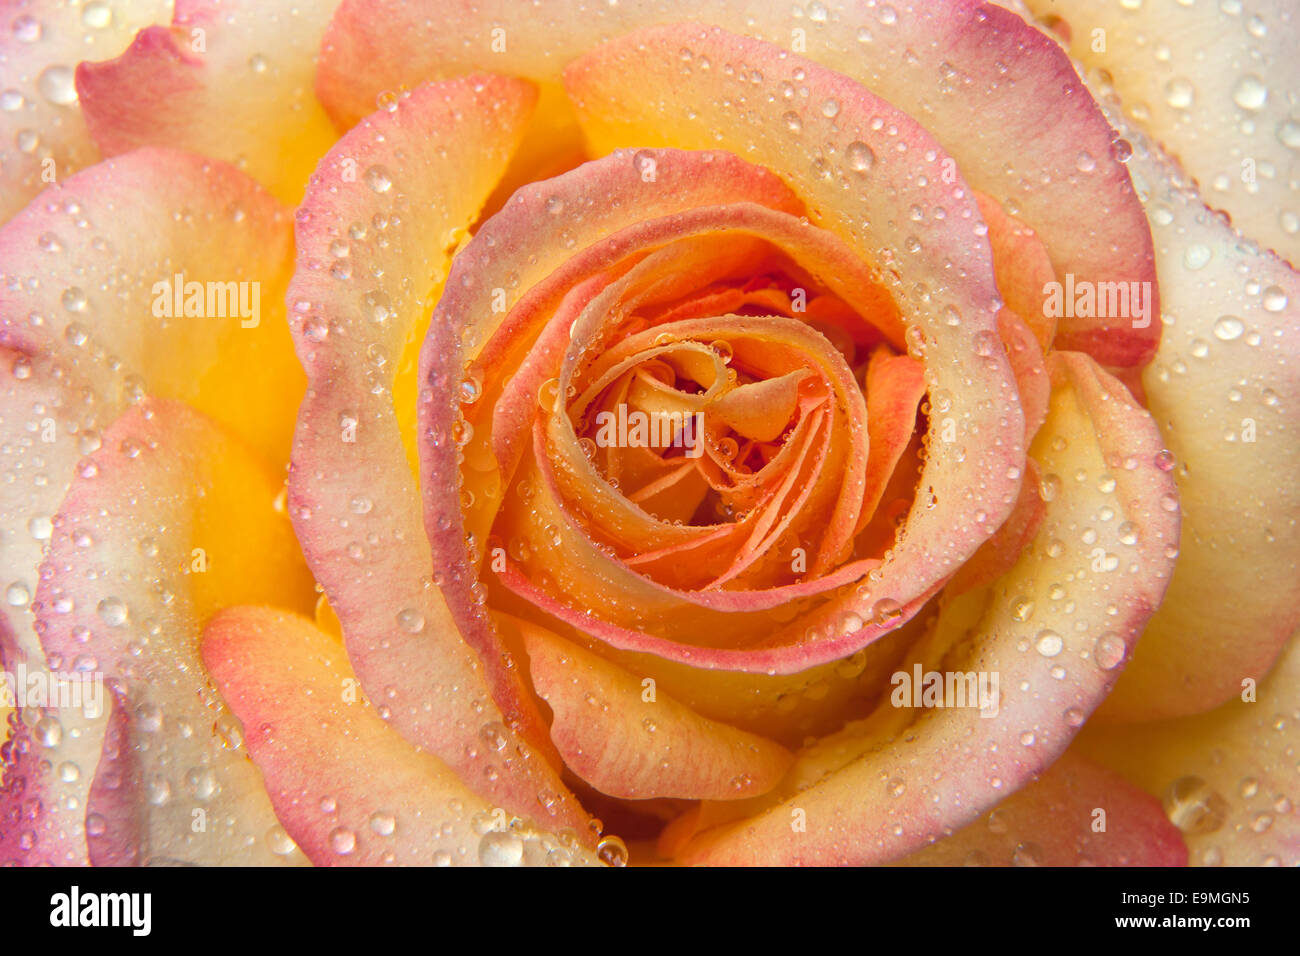 Rose blossom (Rosa sp.) with water drops Stock Photo